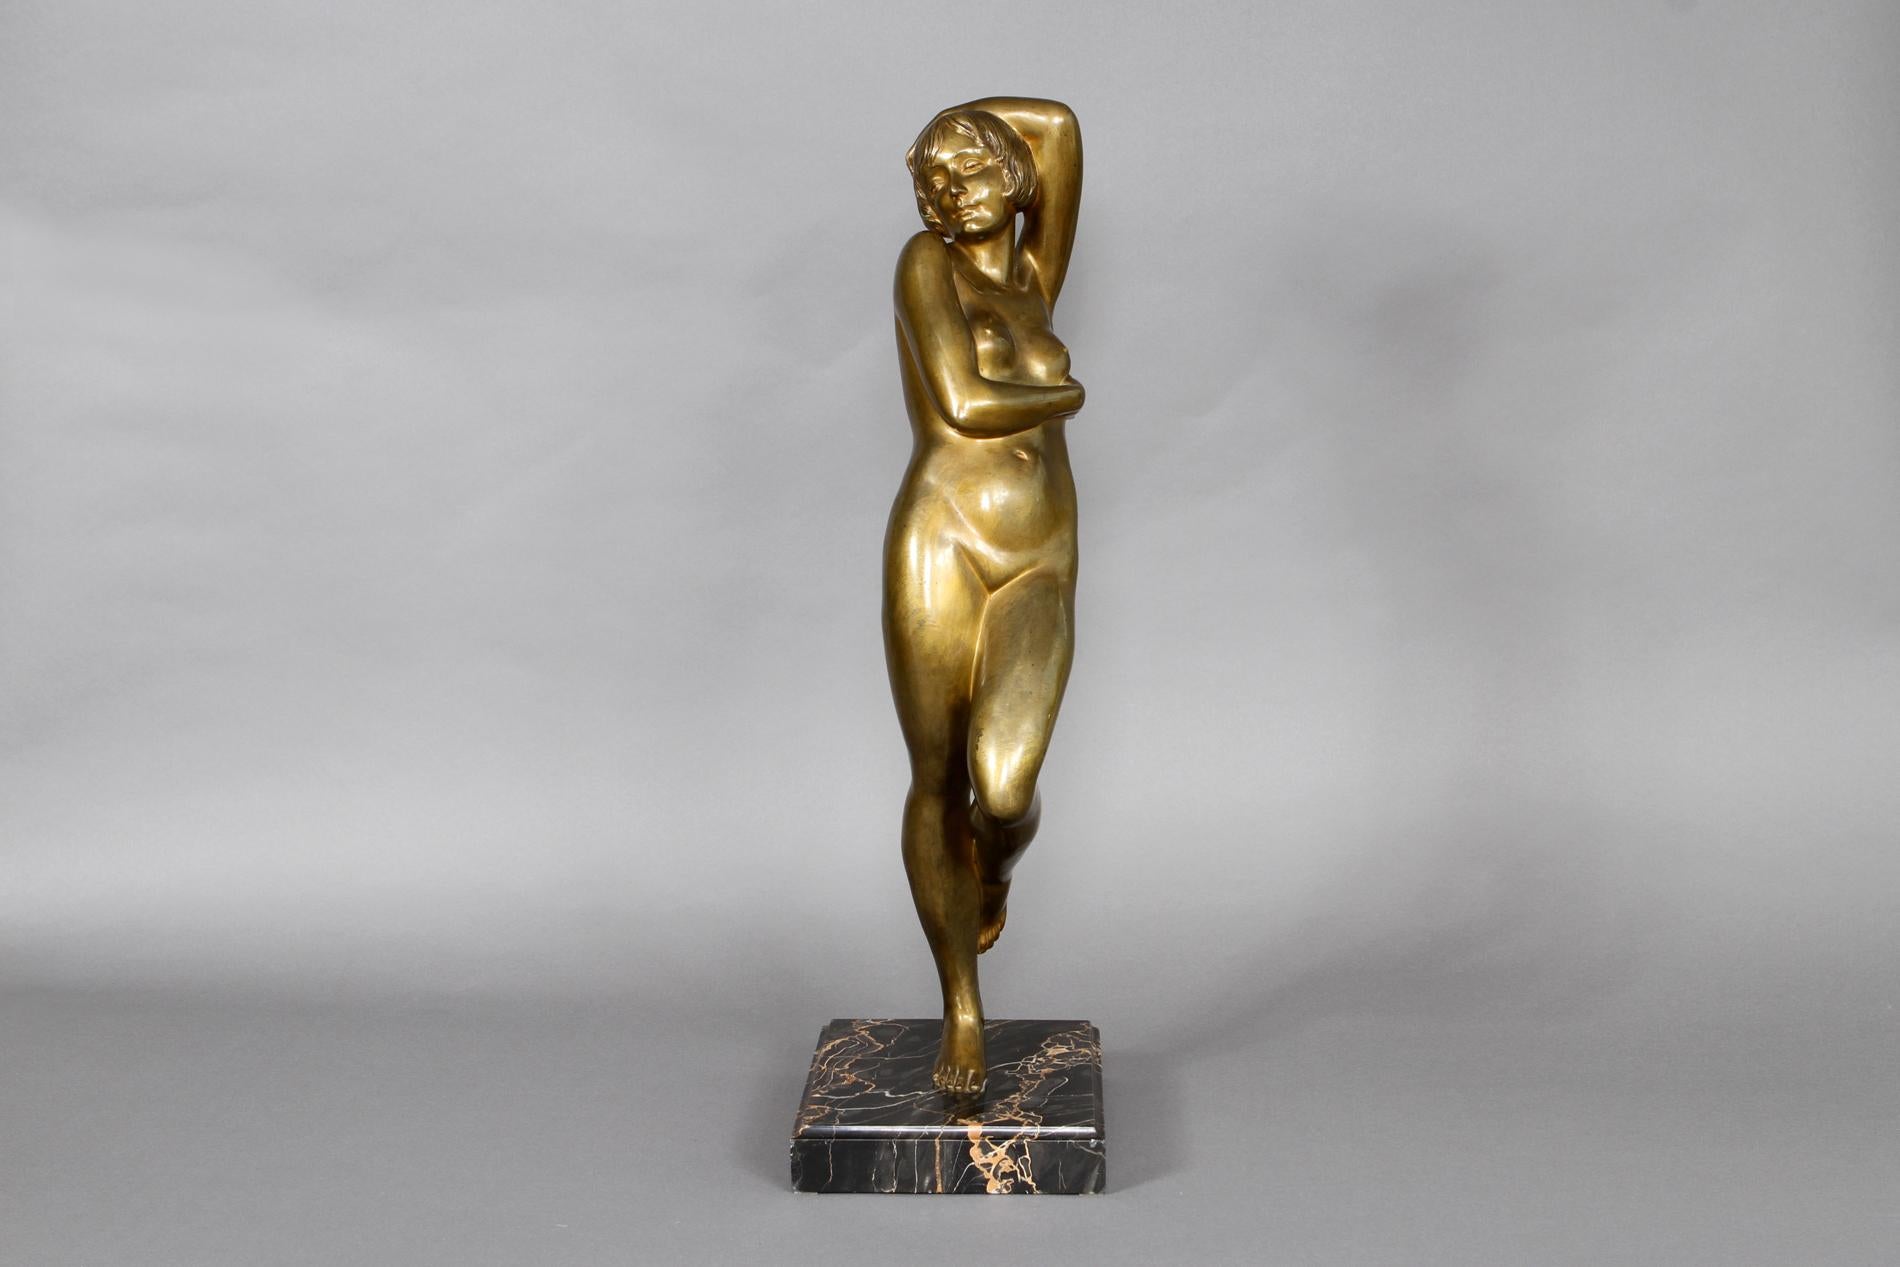 French Art deco bronze sculpture made by the french sculptor Marie-Louise Simard. The sculptor is all in gold bronze and has a base in portor marble. It represents a naked woman in a big format, typical style of the artist. 